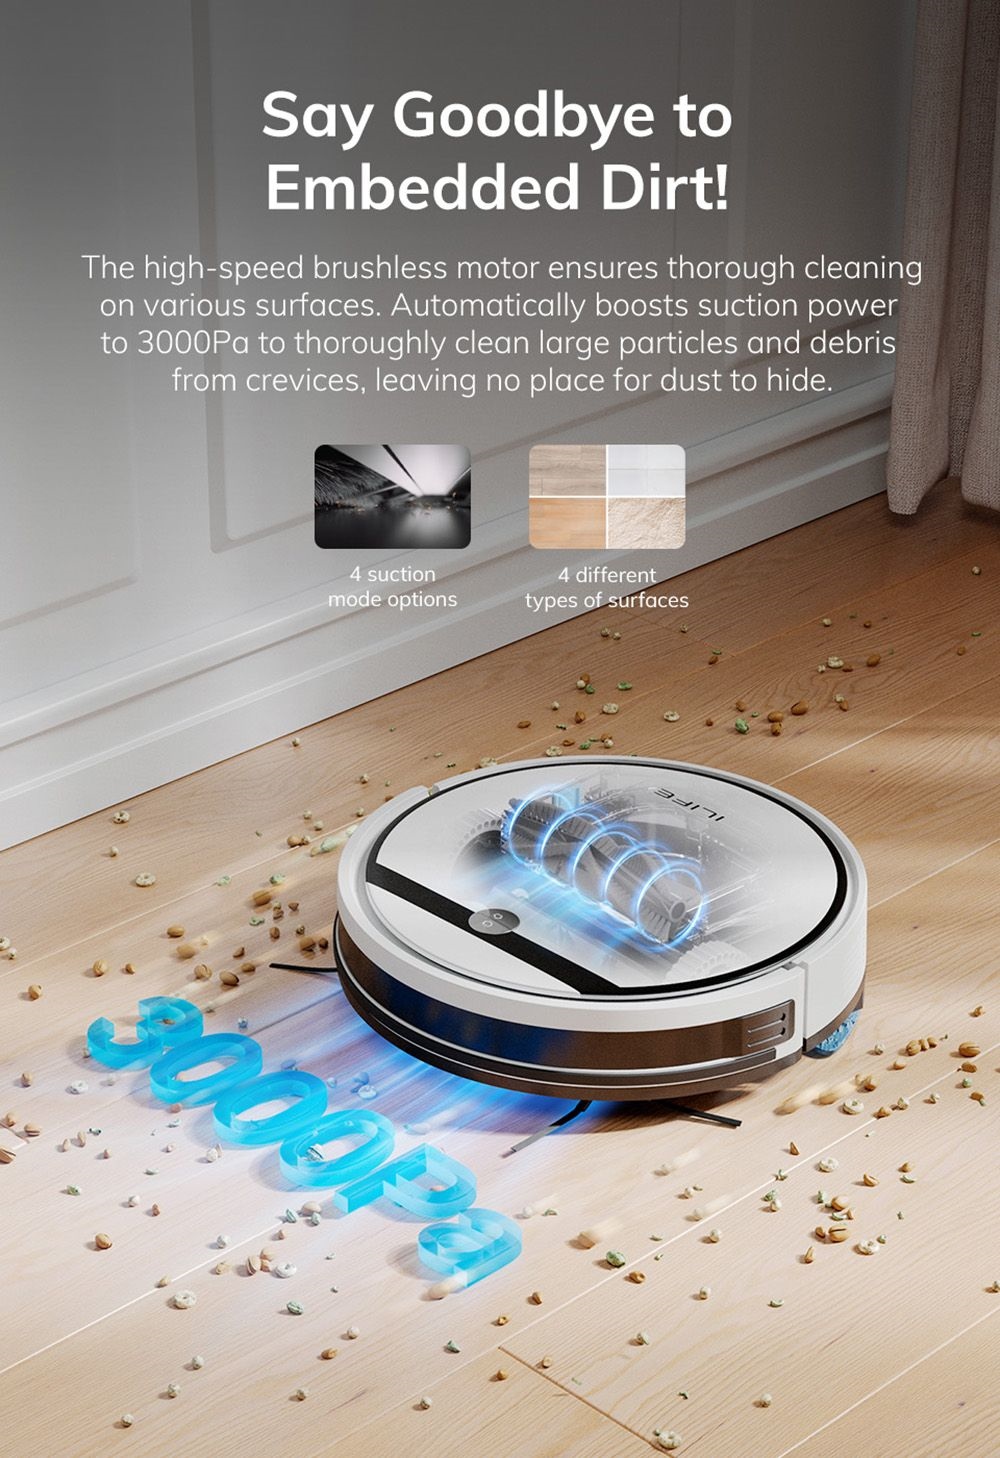 ILIFE V3X Robot Vacuum Cleaner, 2 in 1 Vacuum and Mopping, 3000Pa Suction, 300ml Dustbin, 2900mAh Battery, Up to 120min Runtime, App/Voice Control